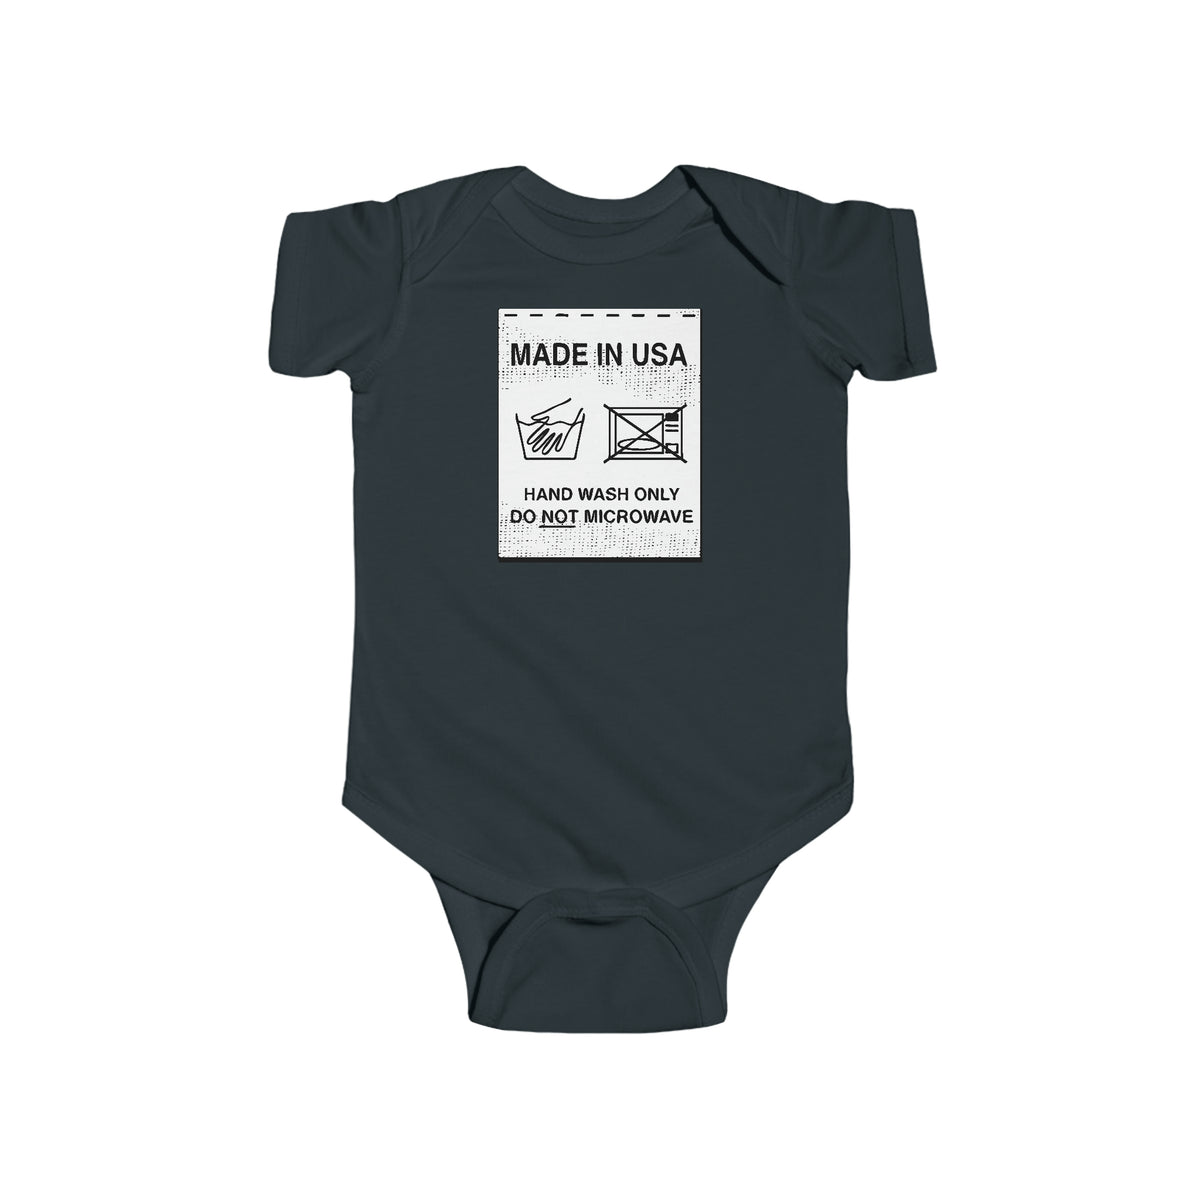 Baby Care Instructions - Baby Onesie